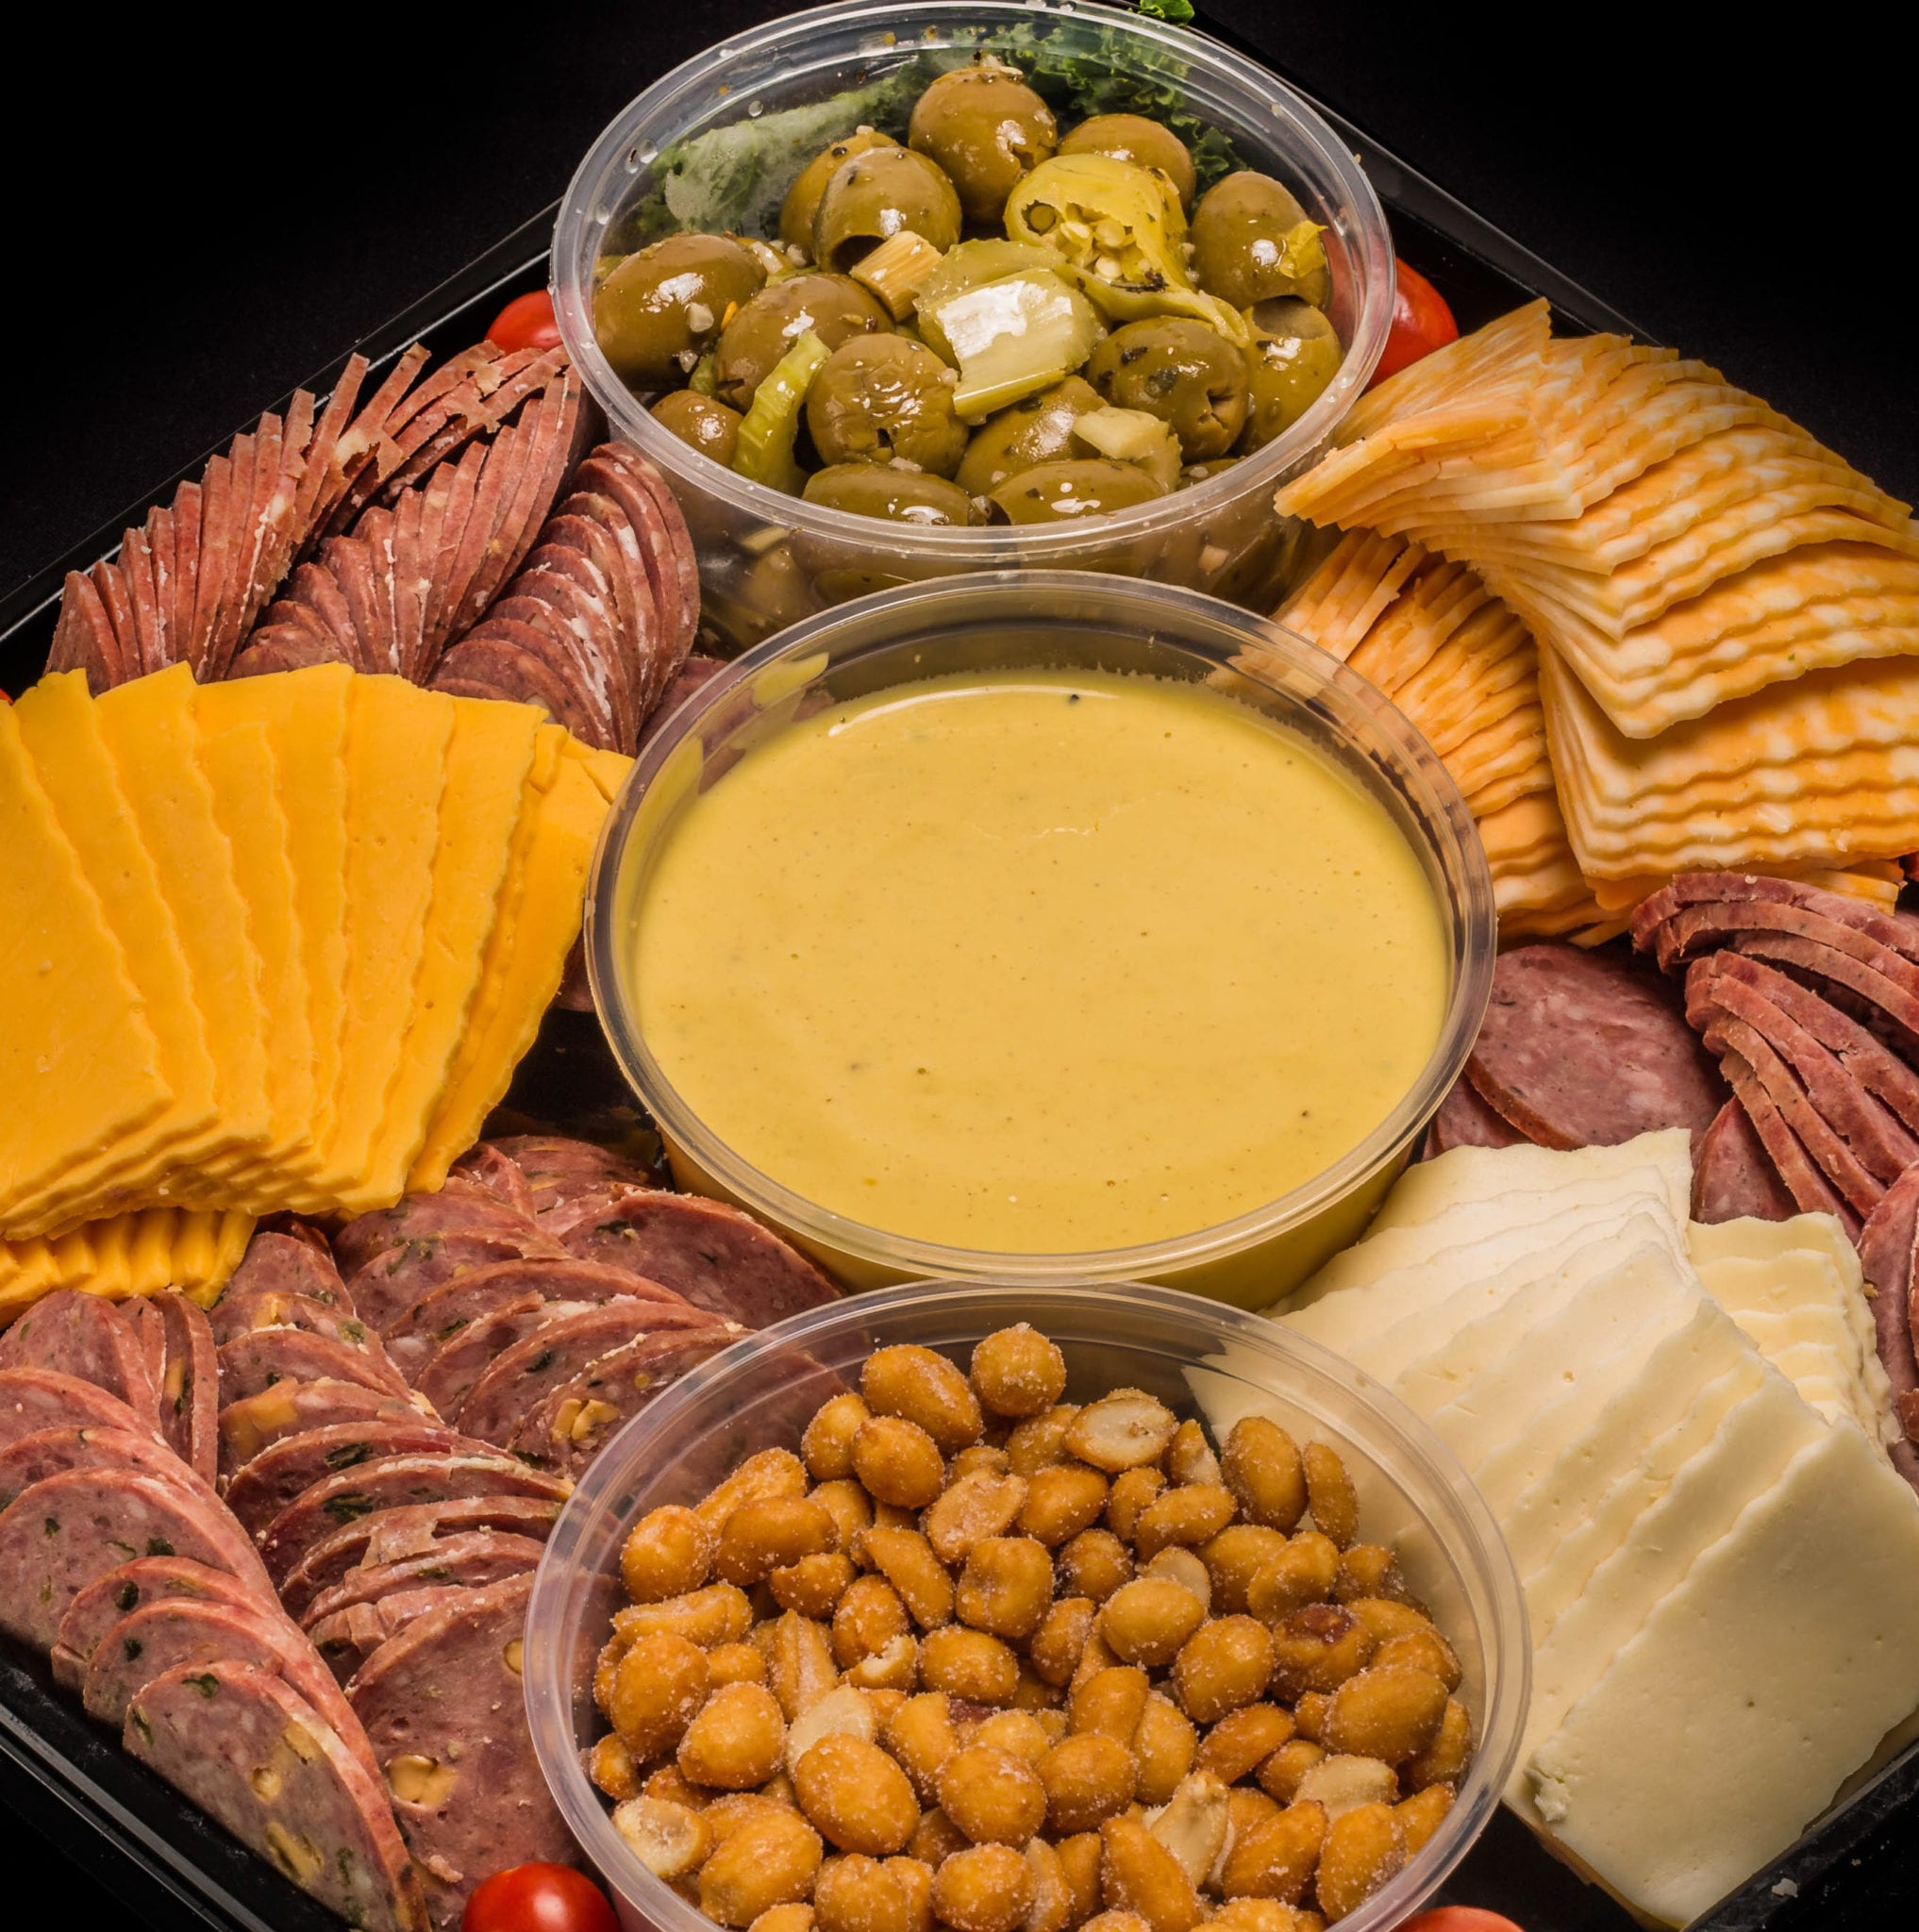 Kenrick's Ultimate Snack Tray | KENRICK'S MEATS & CATERING